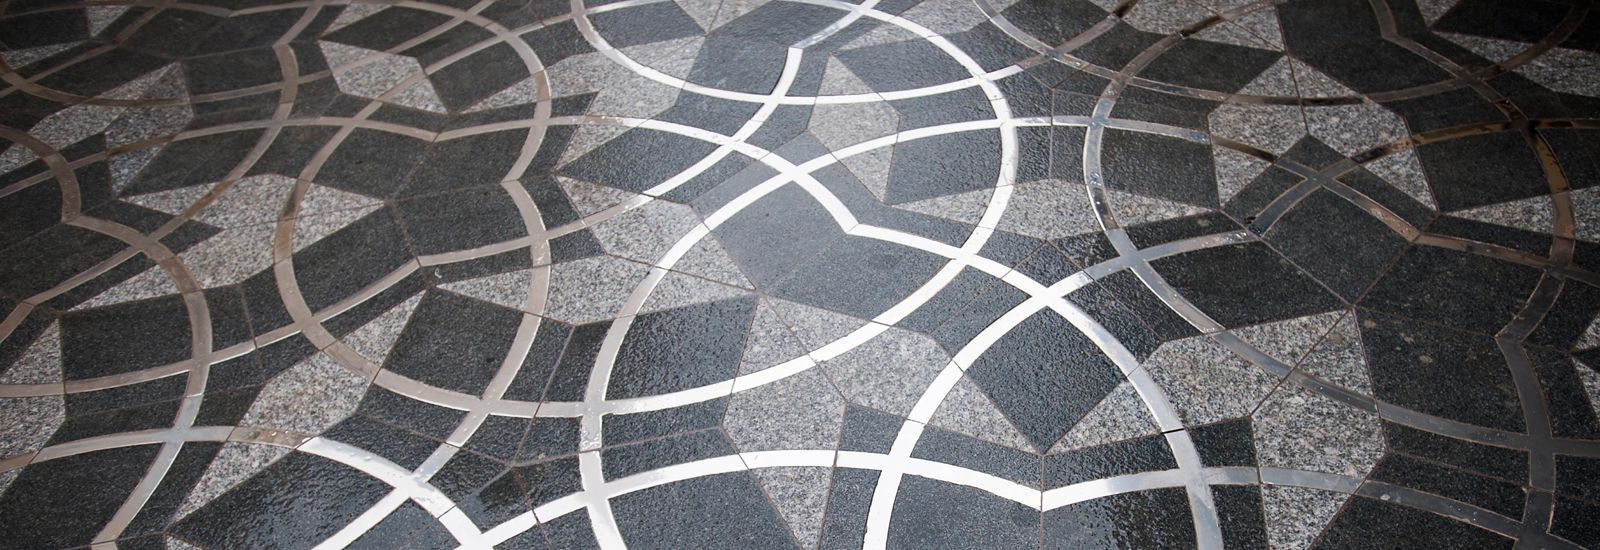 Detail of the Penrose Paving outside the Mathematical Institute